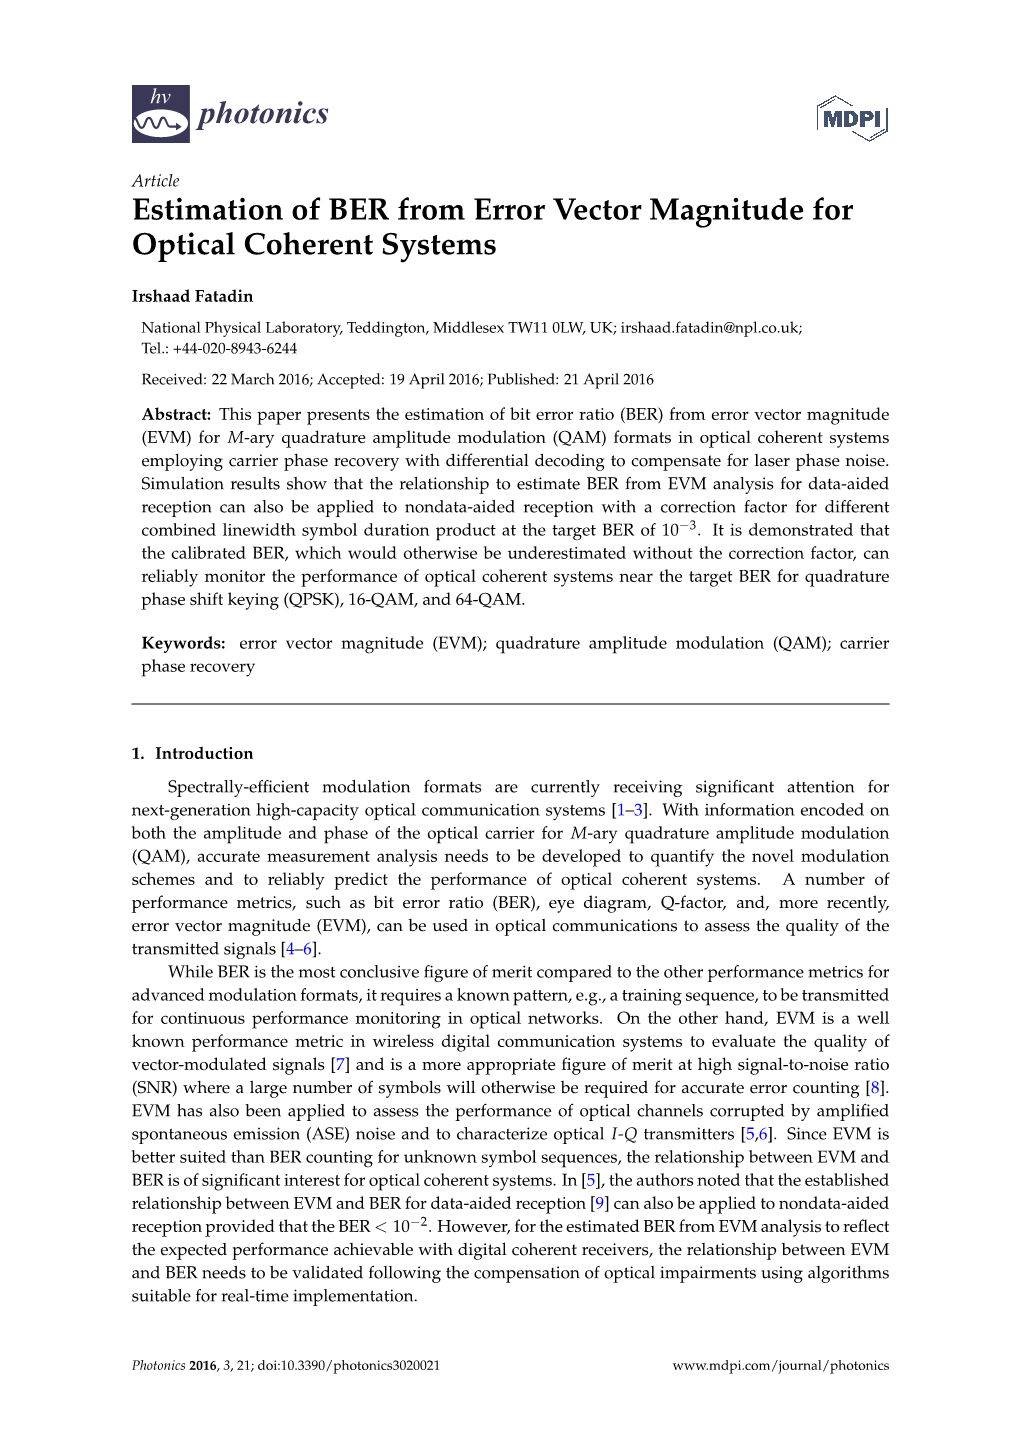 Estimation of BER from Error Vector Magnitude for Optical Coherent Systems